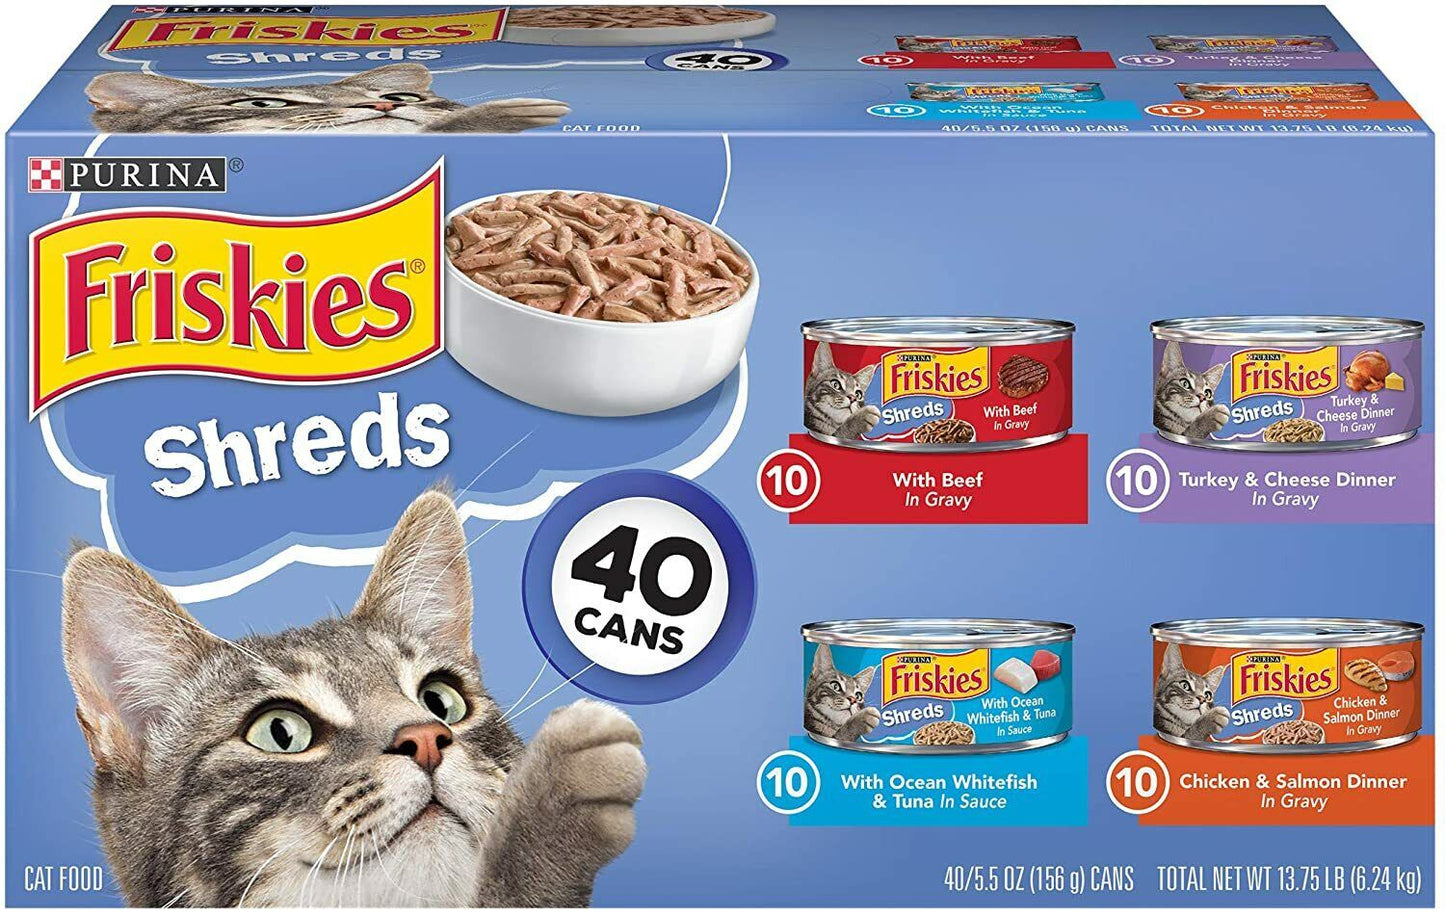 Purina Friskies Shreds In Gravy or Sauce Wet Cat Food - 5.5 oz, 32 or 40 Cans